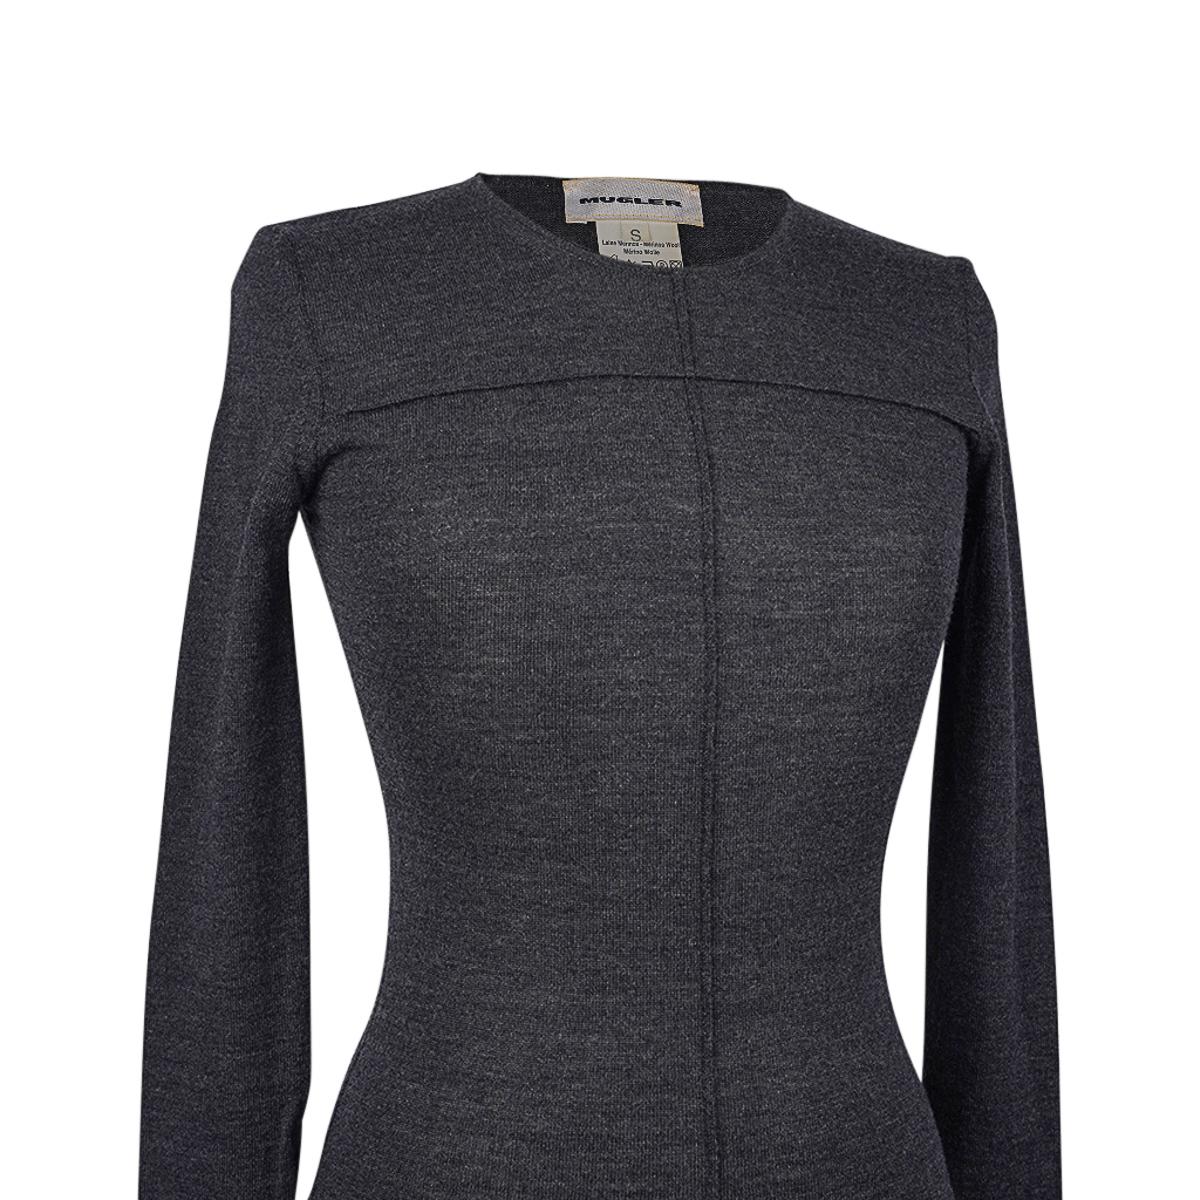 Women's Mugler Vintage Charcoal Gray Knit Top Classic S